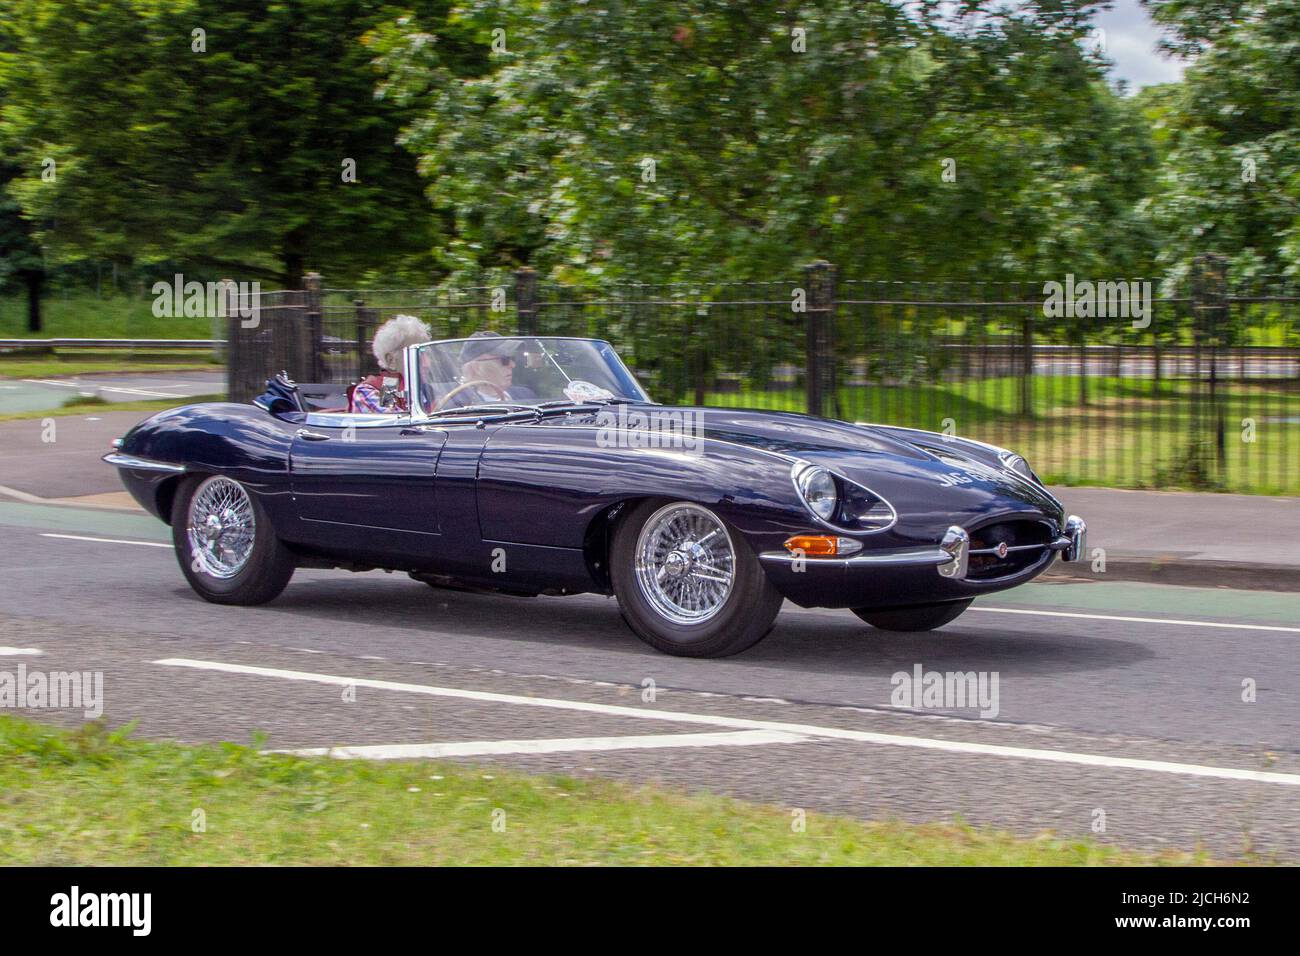 1969 60s sixties blue British Jaguar E Type 4235cc petrol roadster; automobiles featured during the 58th year of the Manchester to Blackpool Touring Assembly for Veteran, Vintage, Classic and Cherished cars. Stock Photo